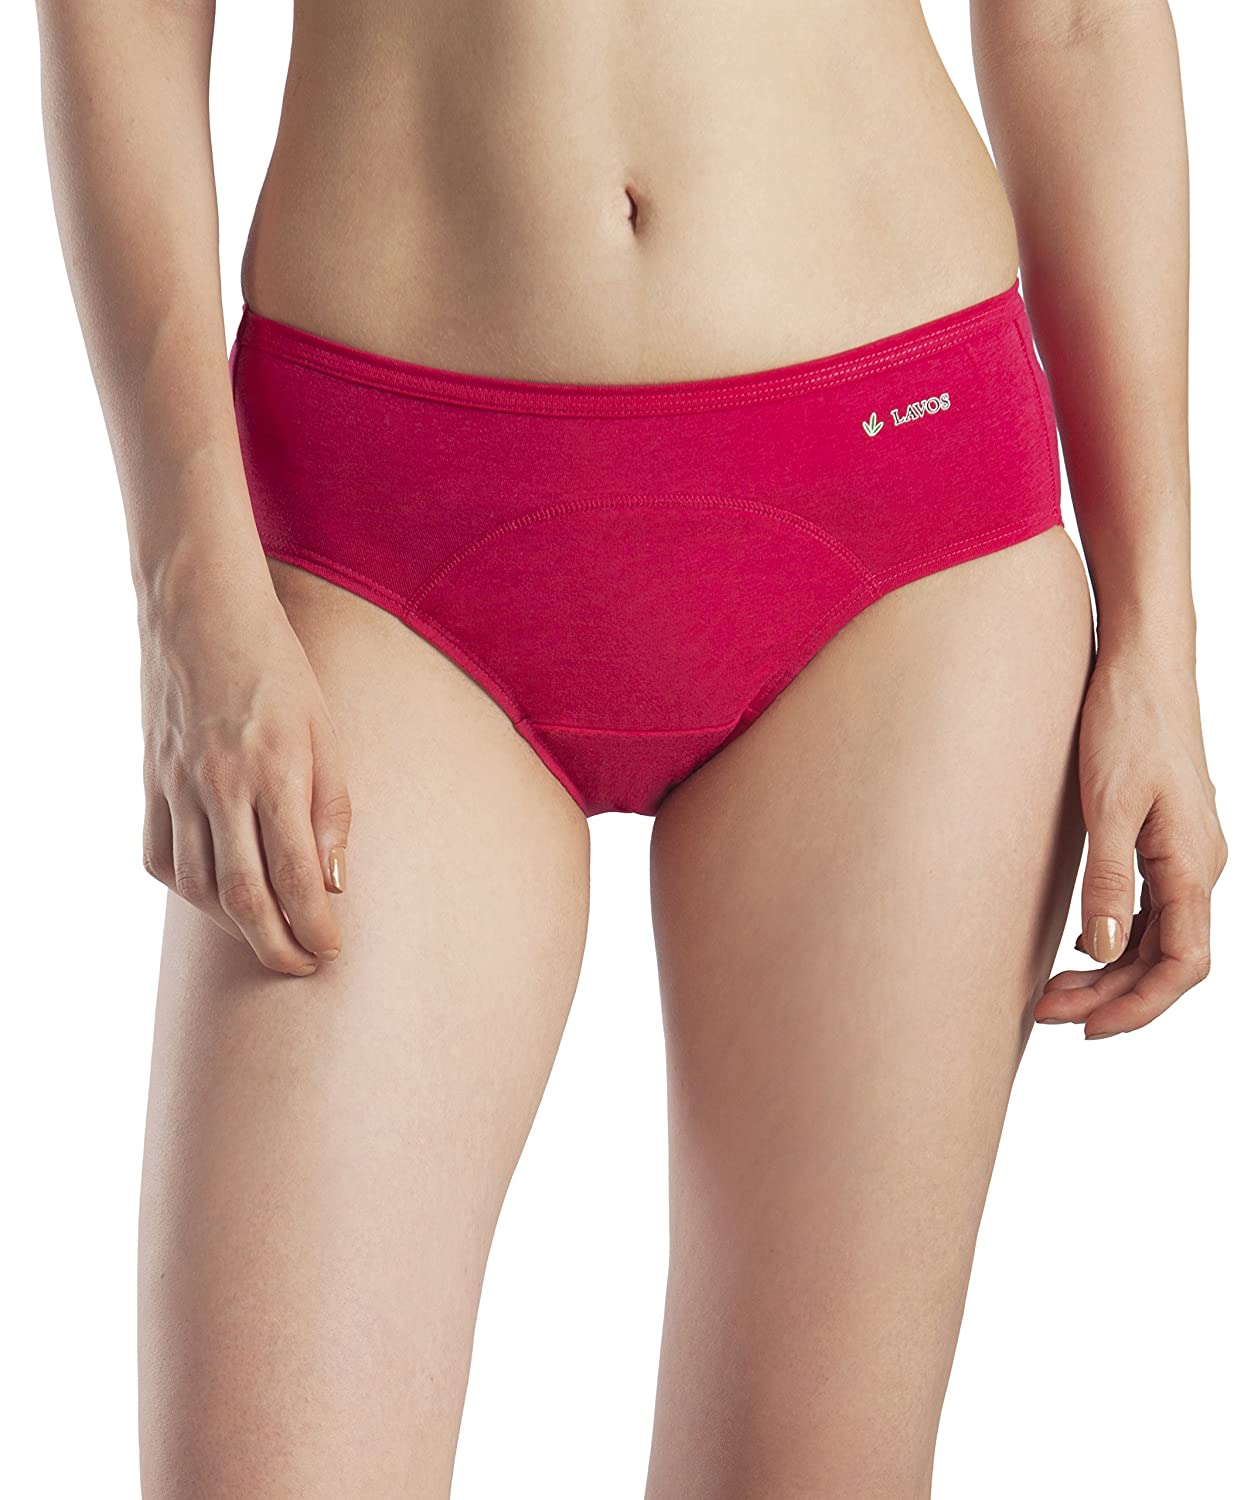 Lavos Periods Leakproof Panty